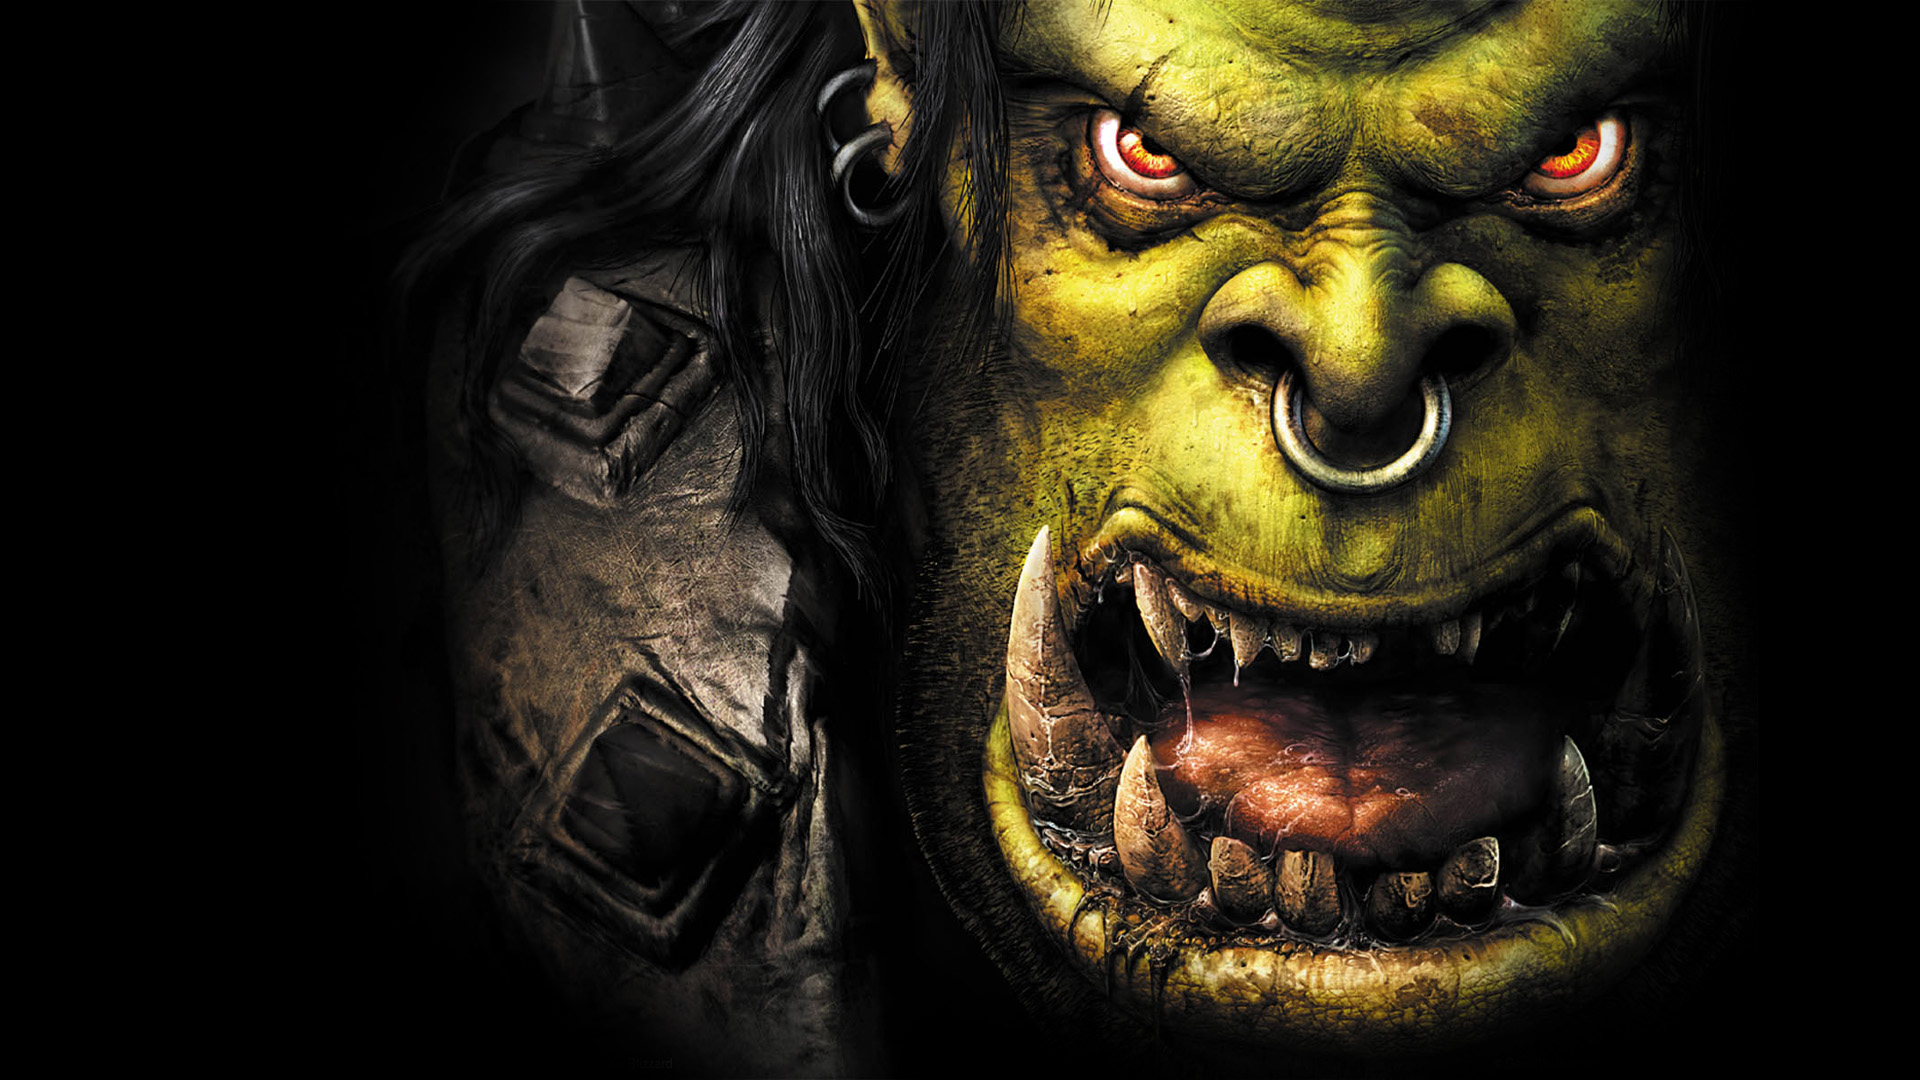 Video Game Warcraft III: Reign of Chaos HD Wallpaper | Background Image